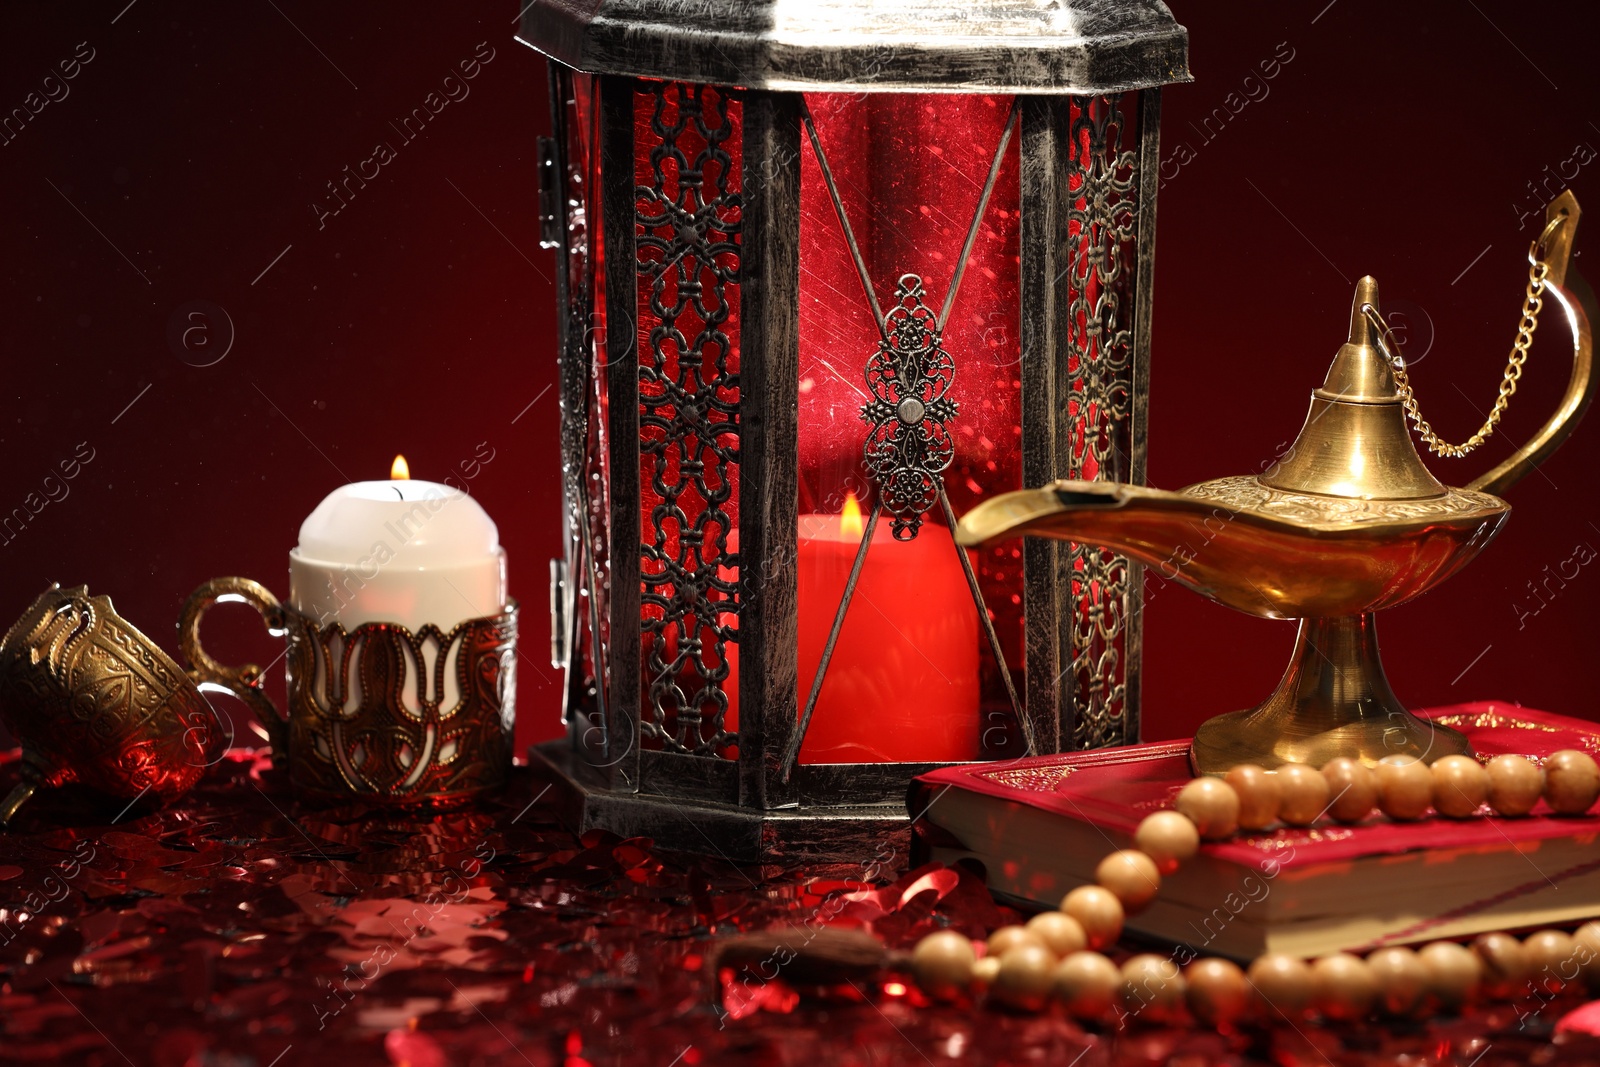 Photo of Arabic lantern, Quran, misbaha, burning candle and Aladdin magic lamp on shiny red table